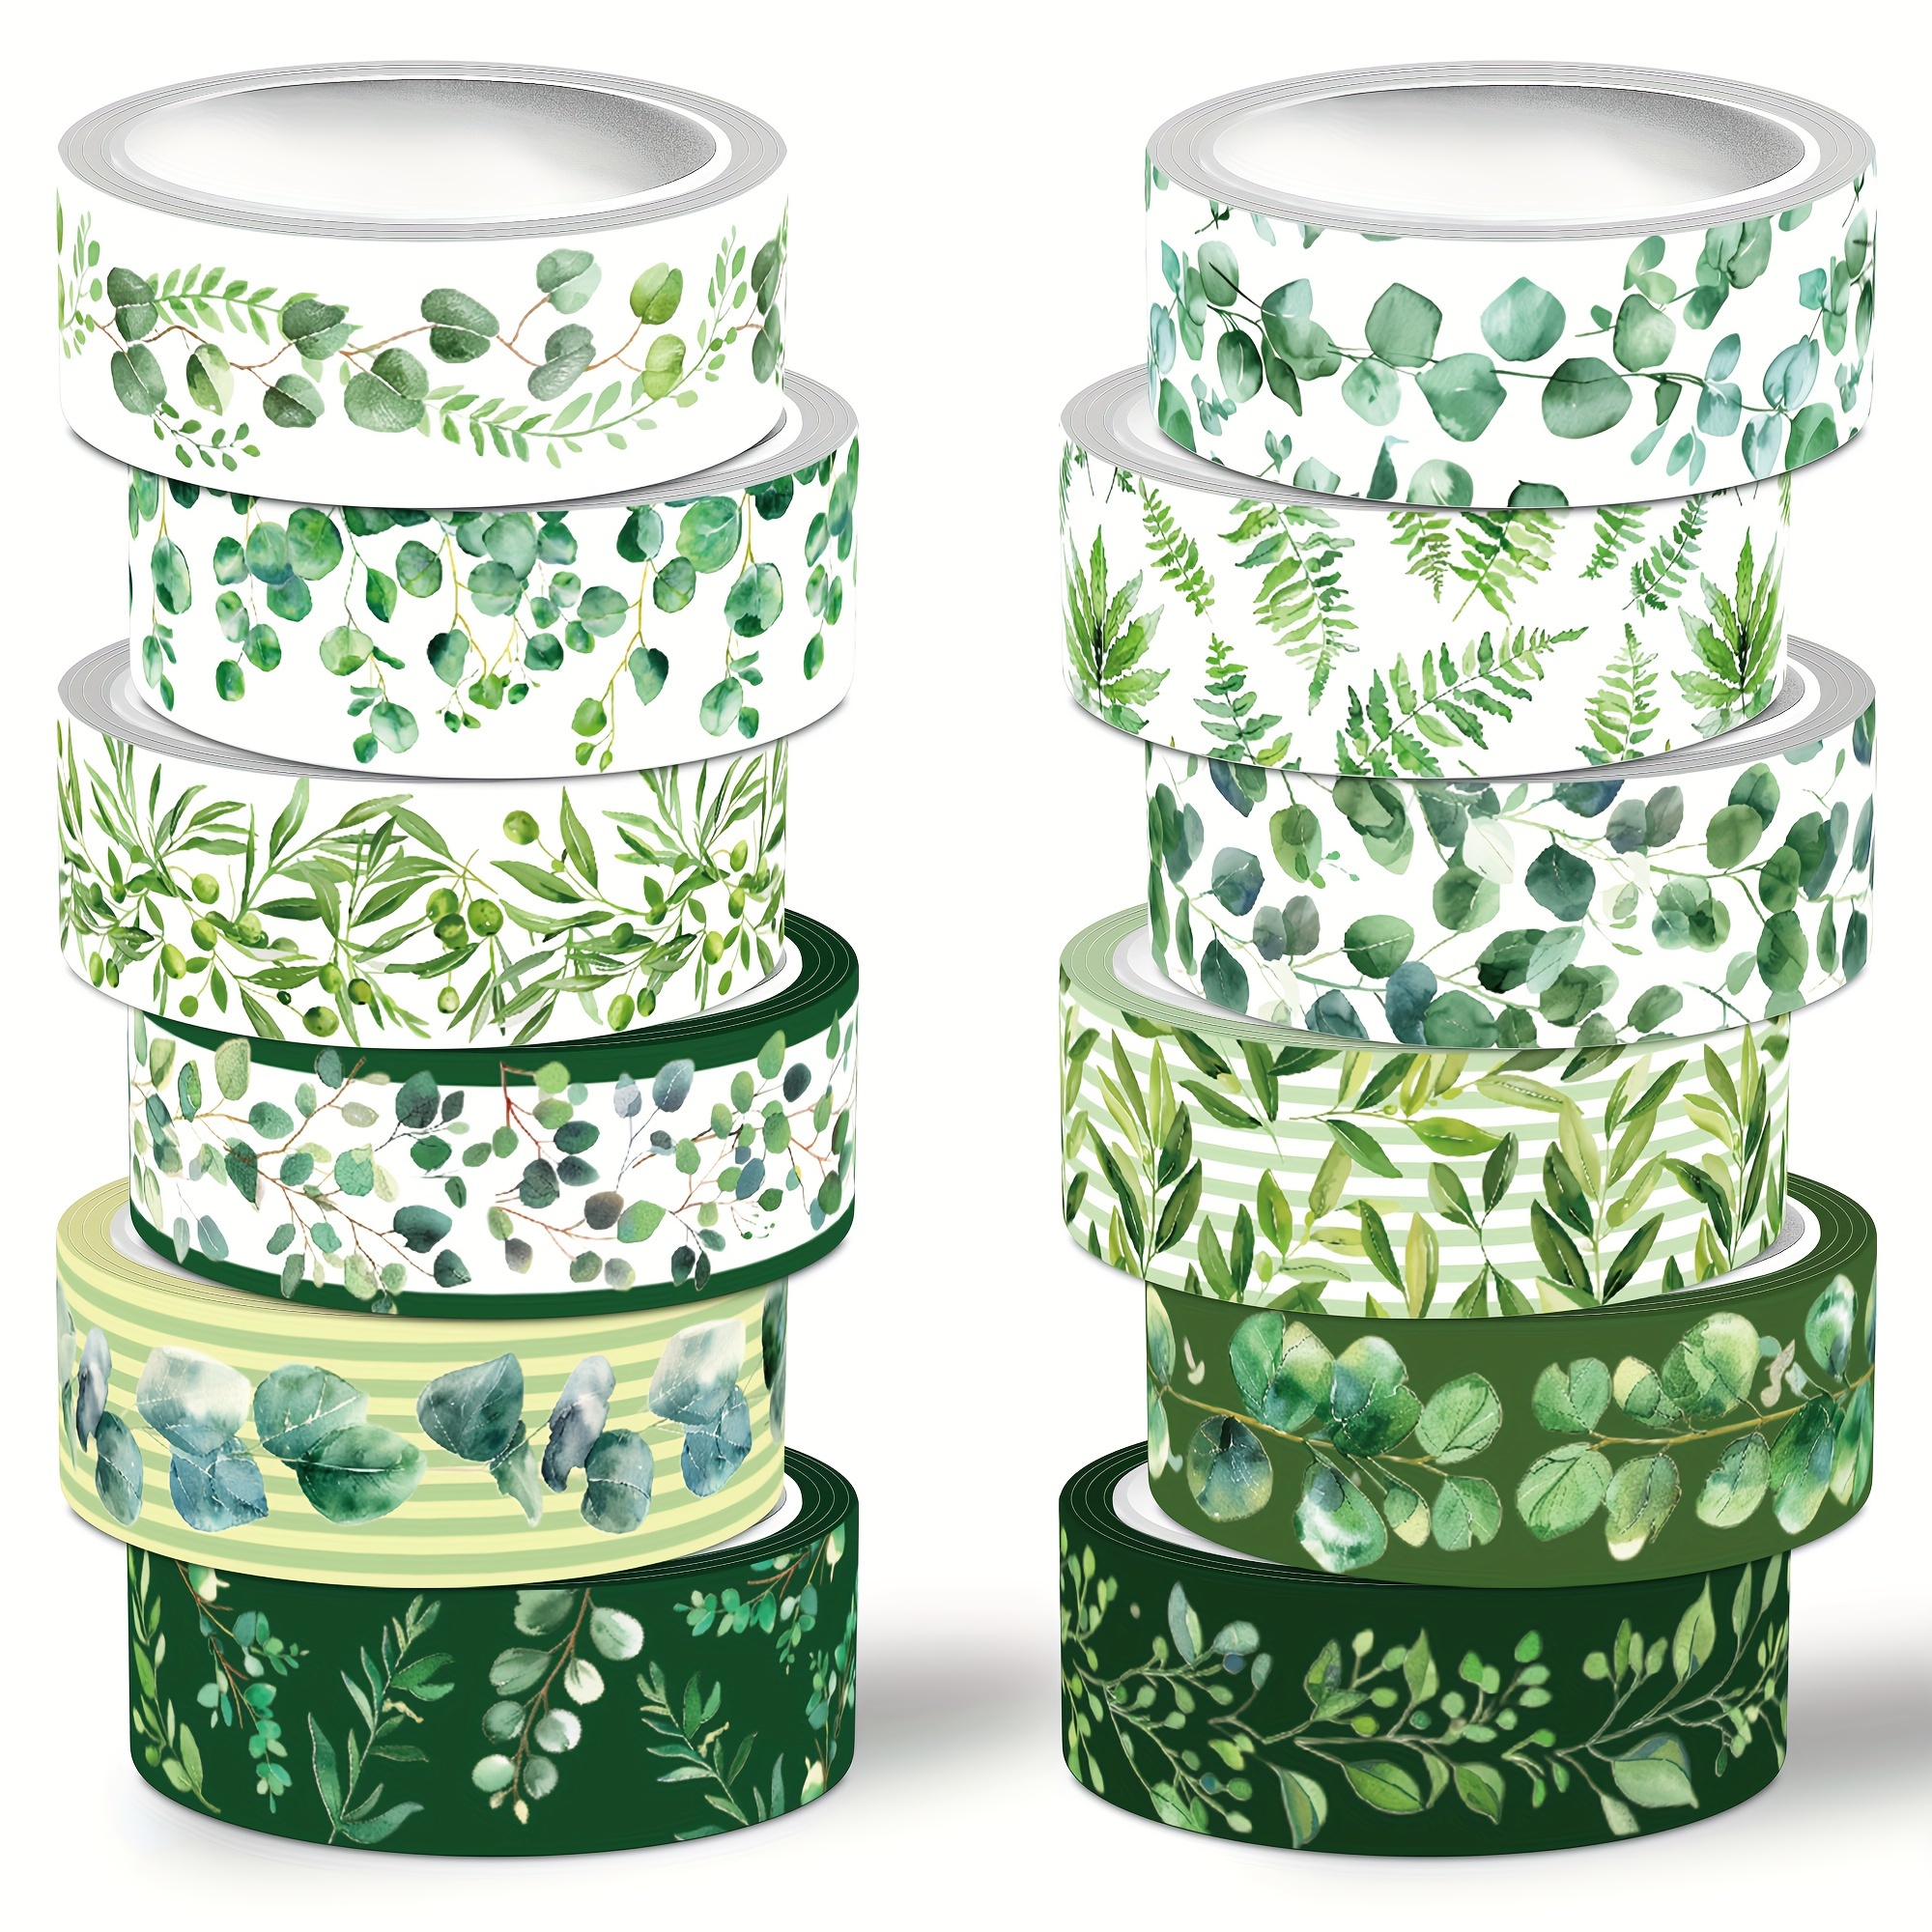 

Nikomie 12-piece Green Leaf Washi Tape Set - Decorative Spring & Tropical Greenery Masking Tape For Scrapbooking, Journaling, Diy Crafts, Planners & Gift Wrapping